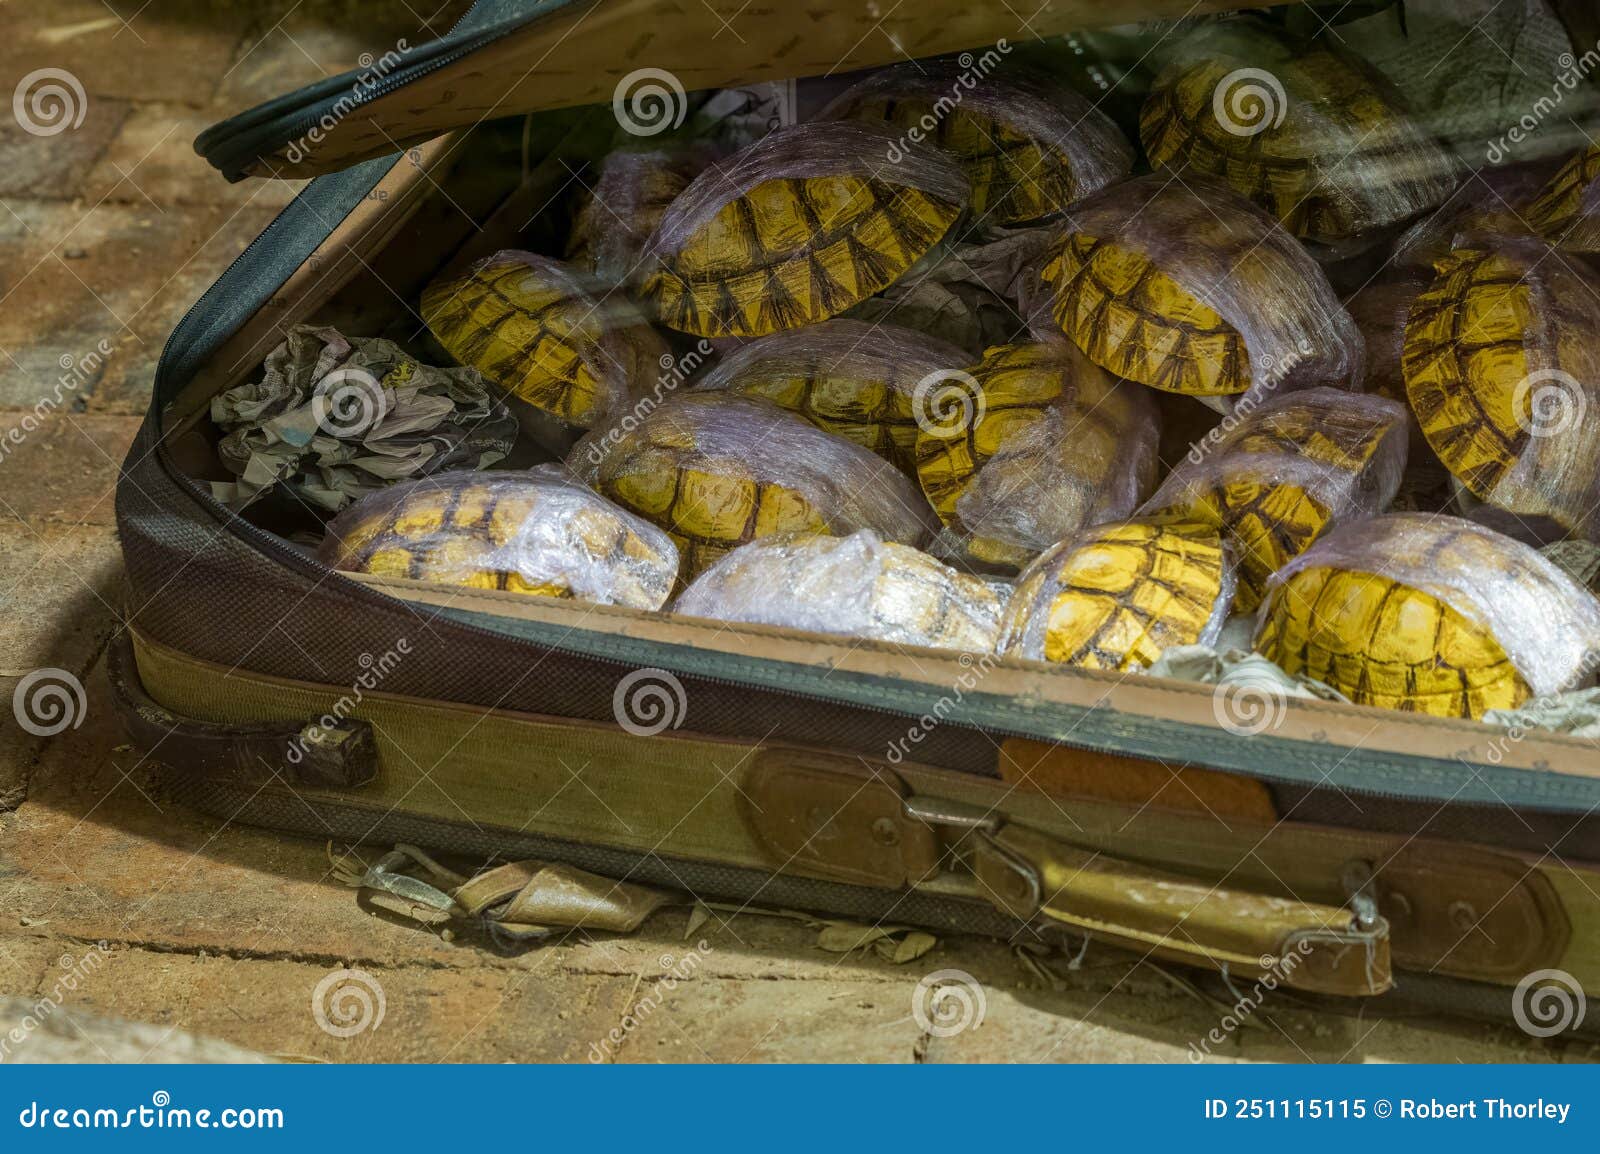 animal smuggling concept. tortoise shells being smuggled in a battered suitcase